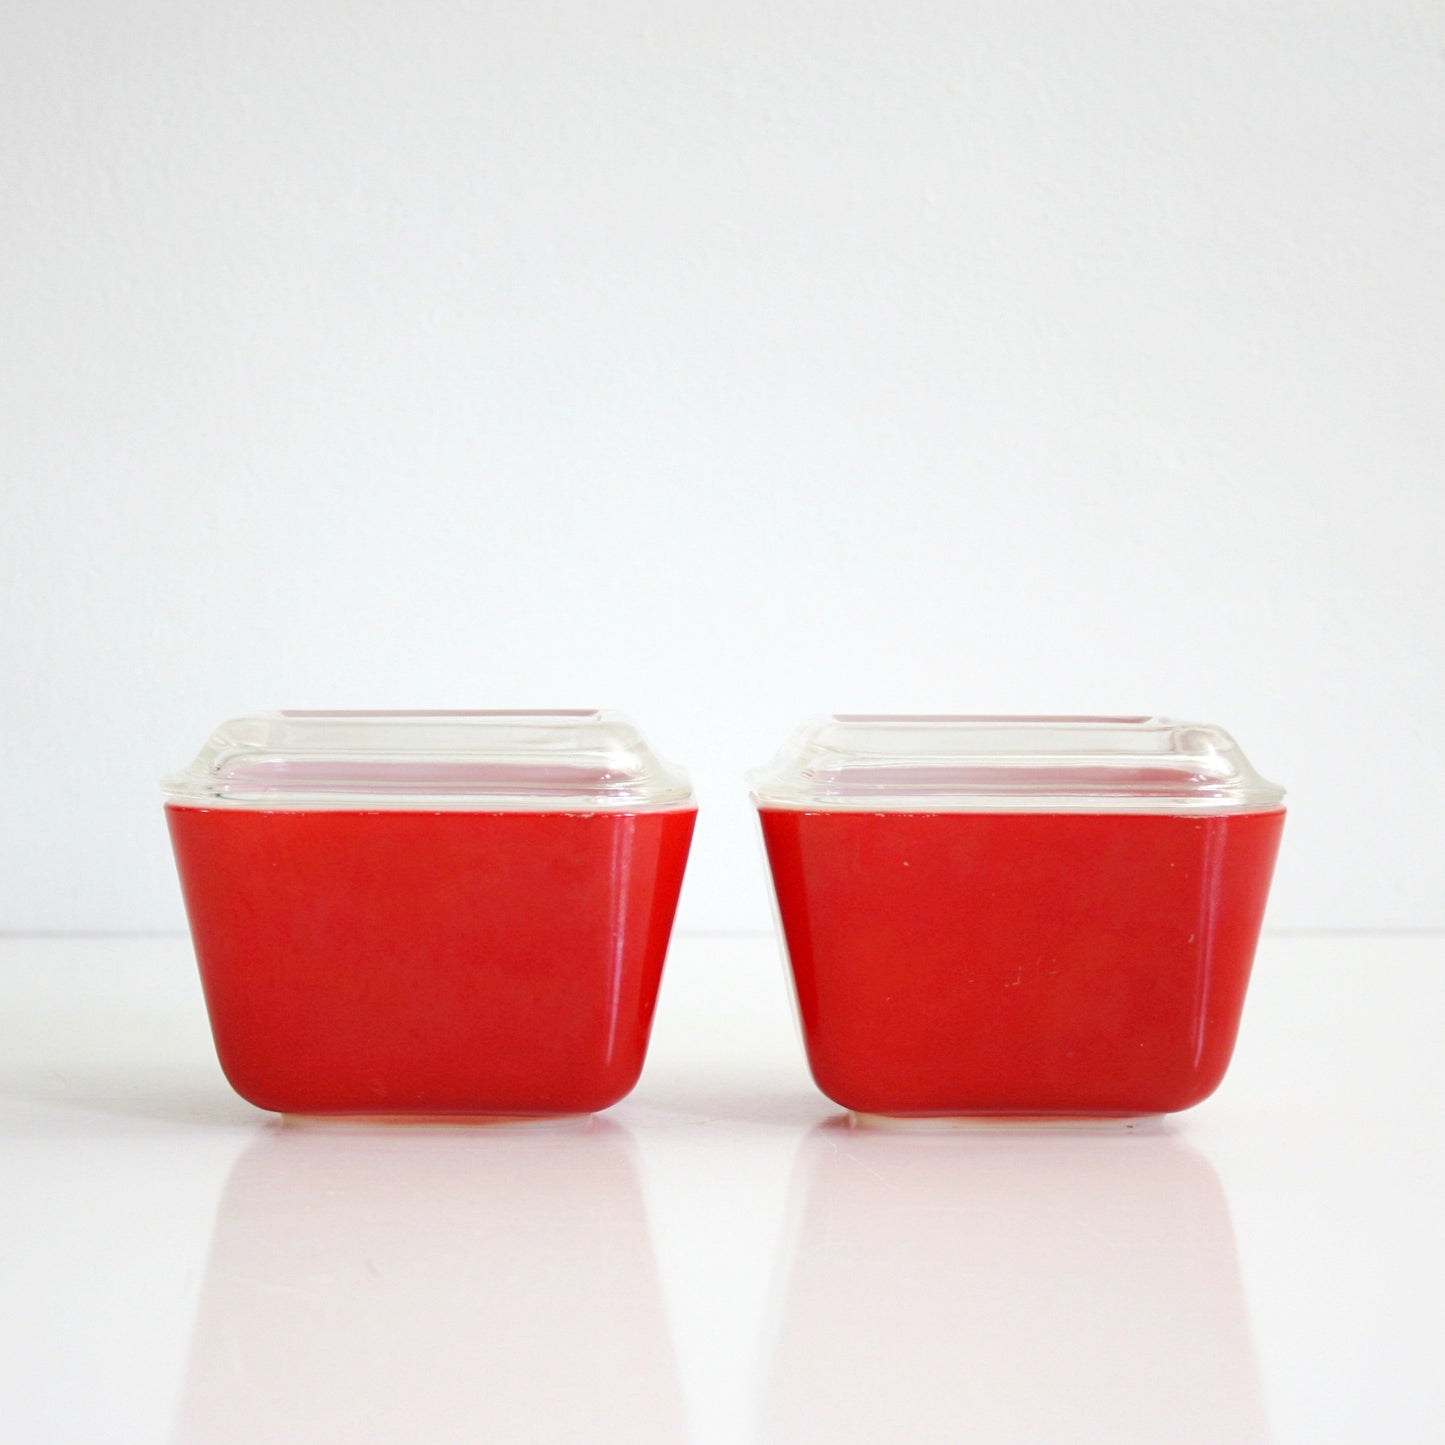 SOLD - Vintage Pair of Red Pyrex Refrigerator Dishes / Vintage Red Pyrex Space Savers